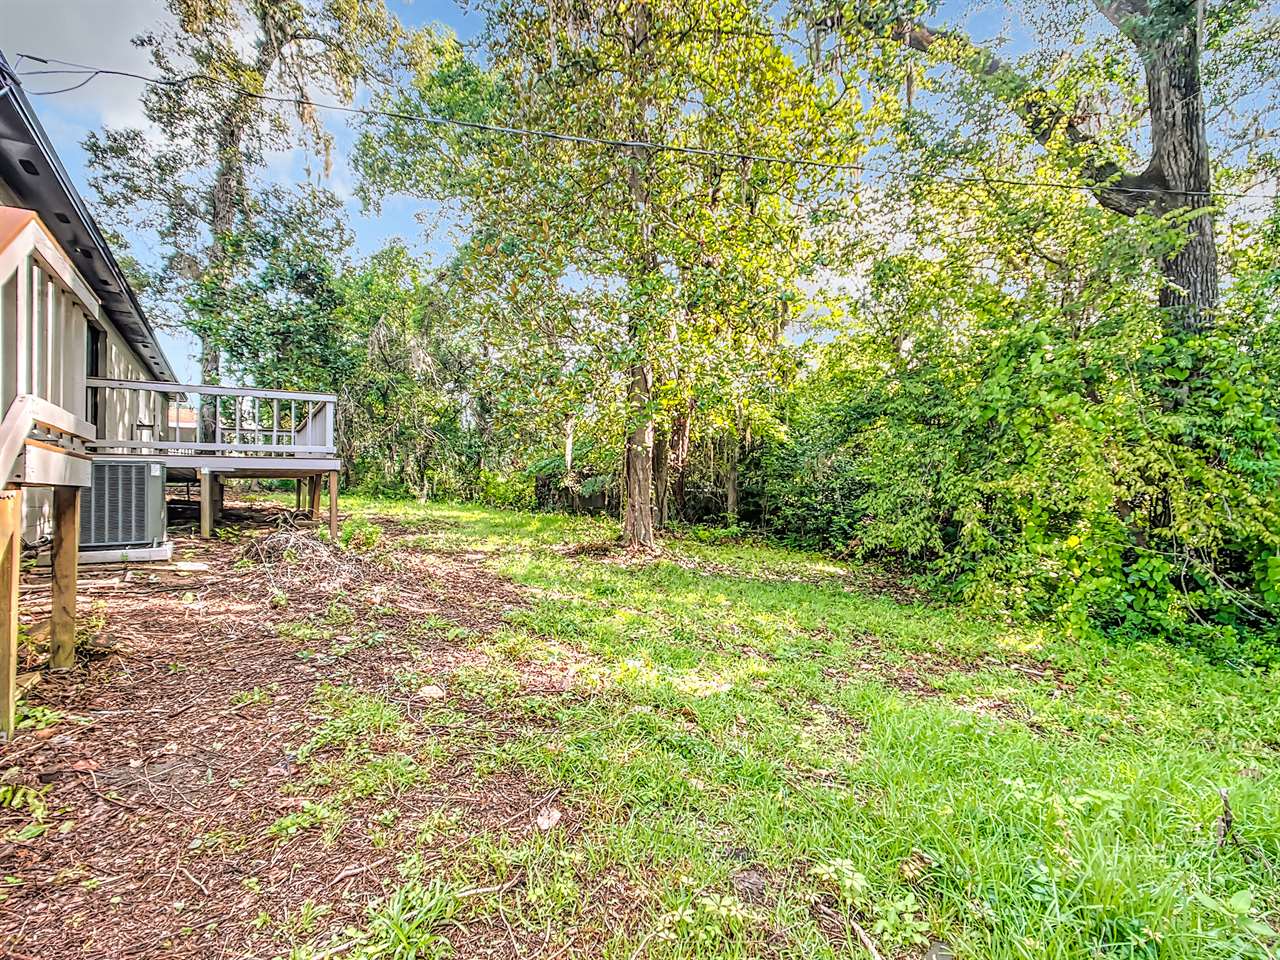 2509 NW 68th Ter, Gainesville, FL 32606